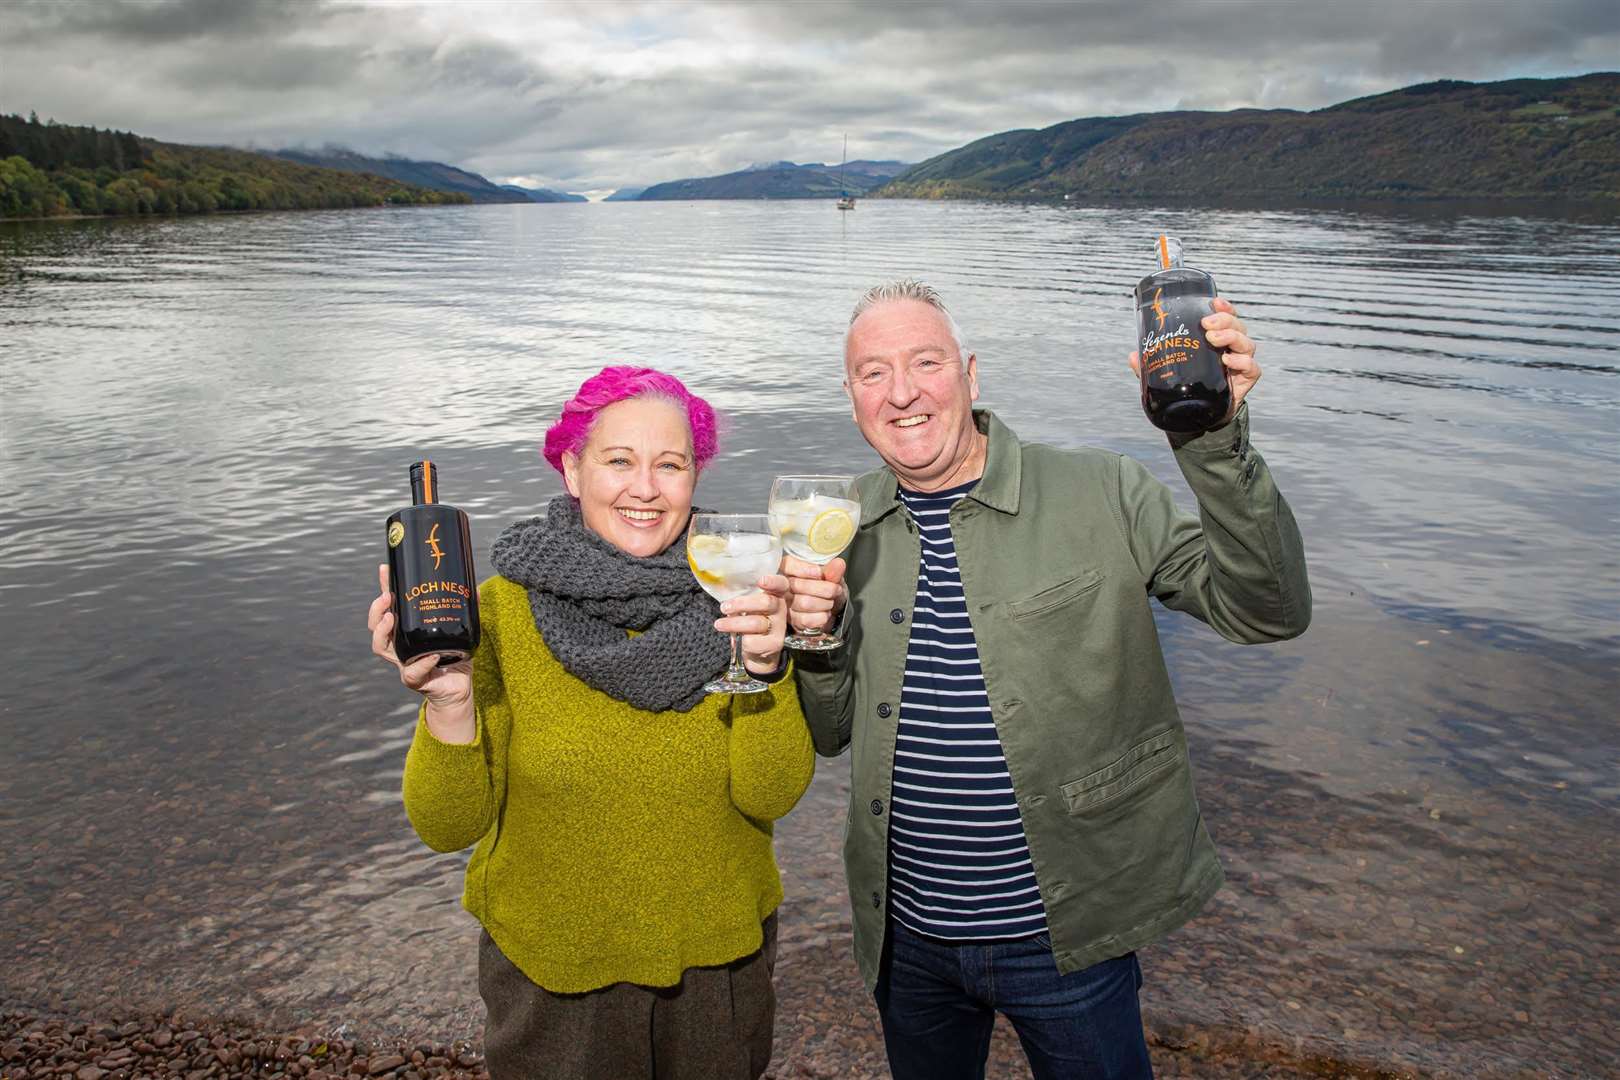 Kevin and Lorien Cameron-Ross, owners and founders of Loch Ness Spirits.